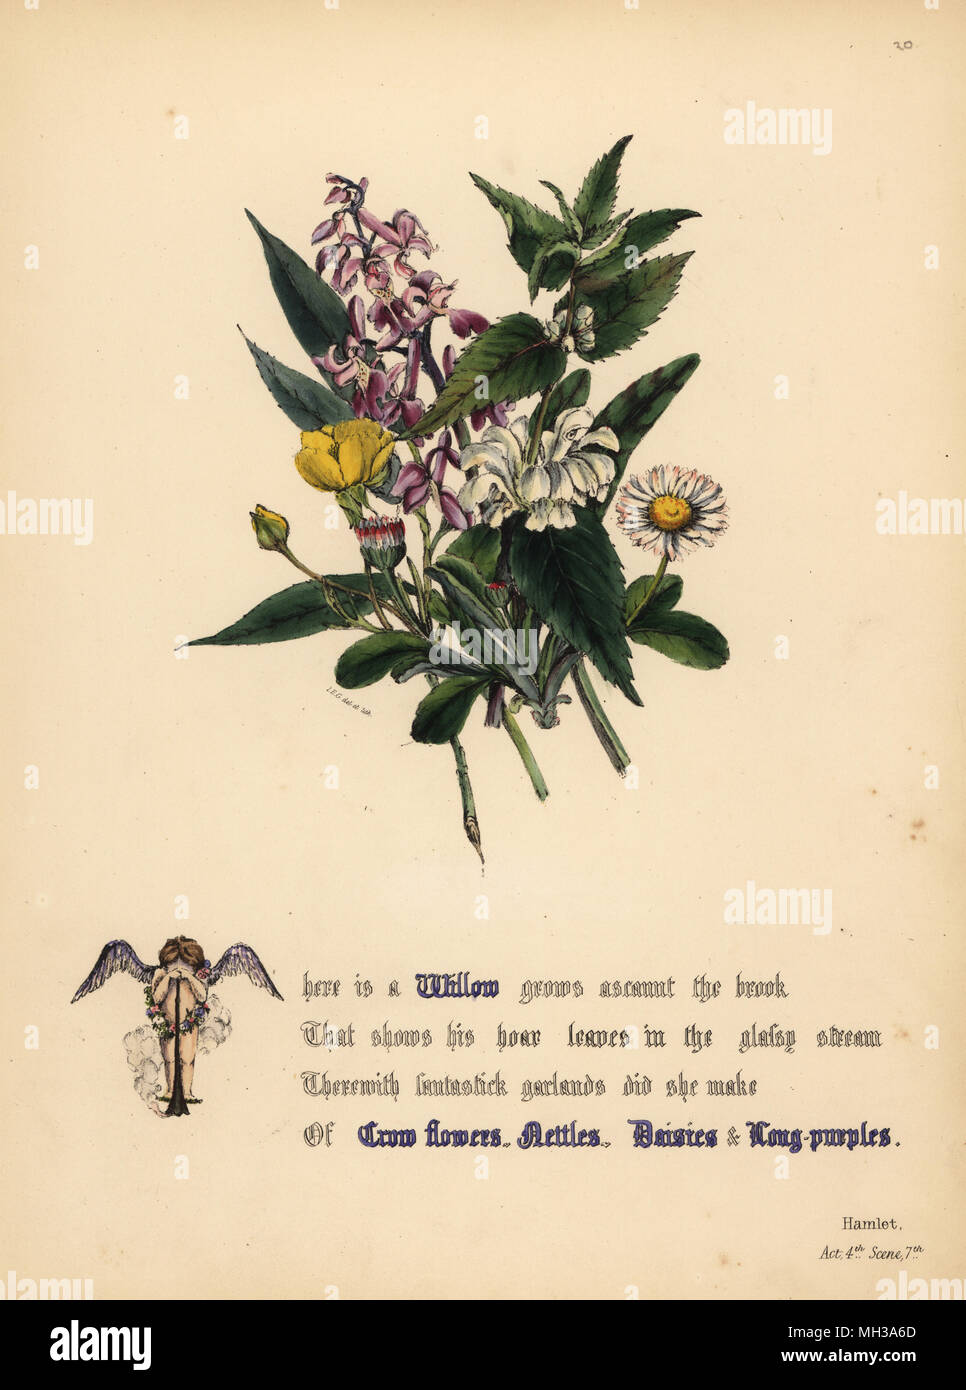 Willow, Crow flowers, Nettles, Daisies, and Long-purples (Hamlet). Handcoioured botanical illustration drawn and lithographed by Jane Elizabeth Giraud from The Flowers of Shakespeare, Day and Haghe, London, 1845. Stock Photo